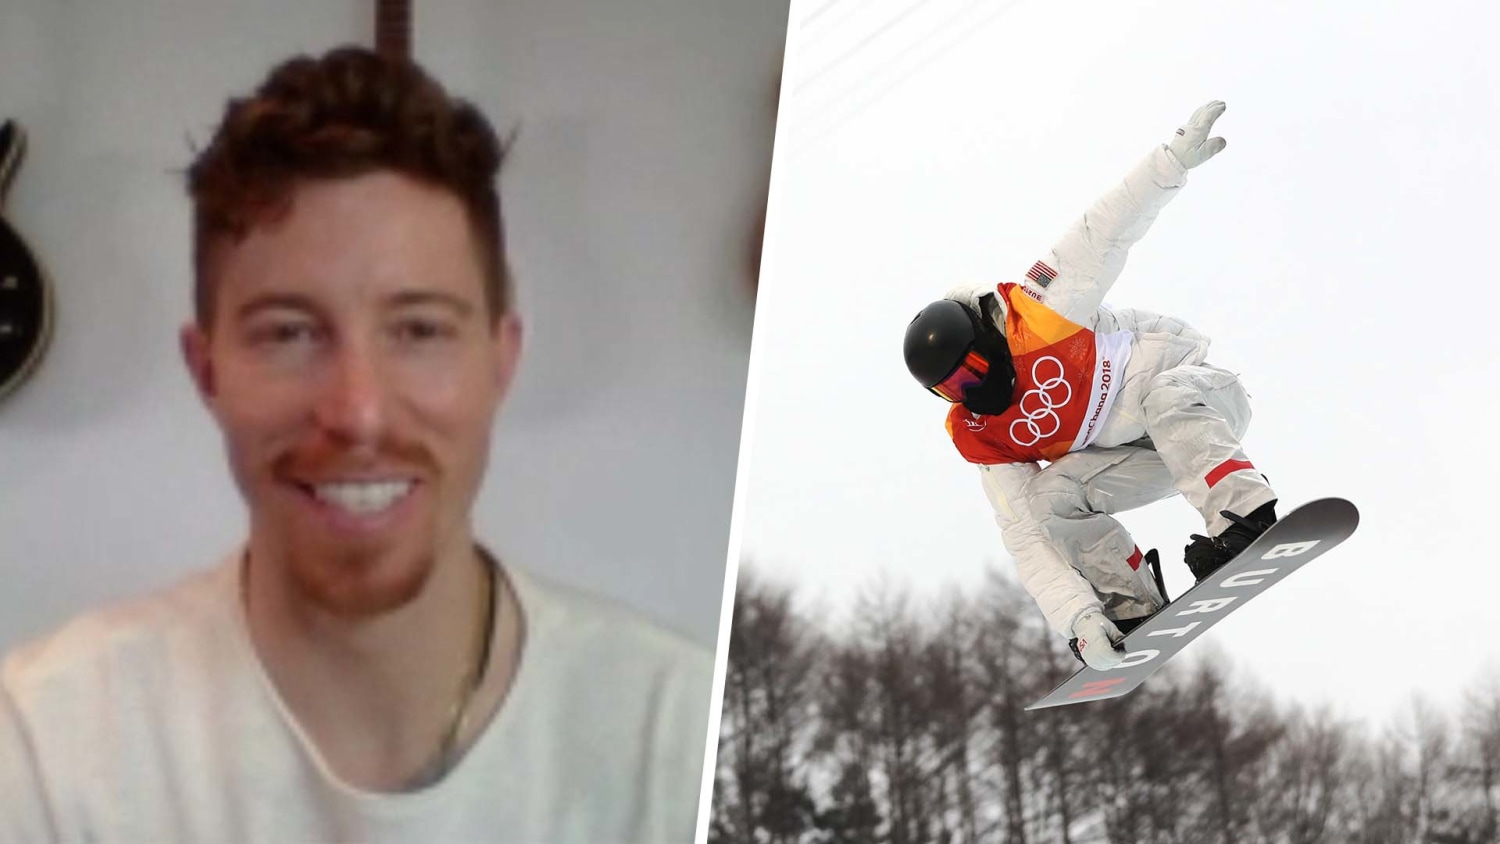 Shaun White tells the story of two snowboards that changed life